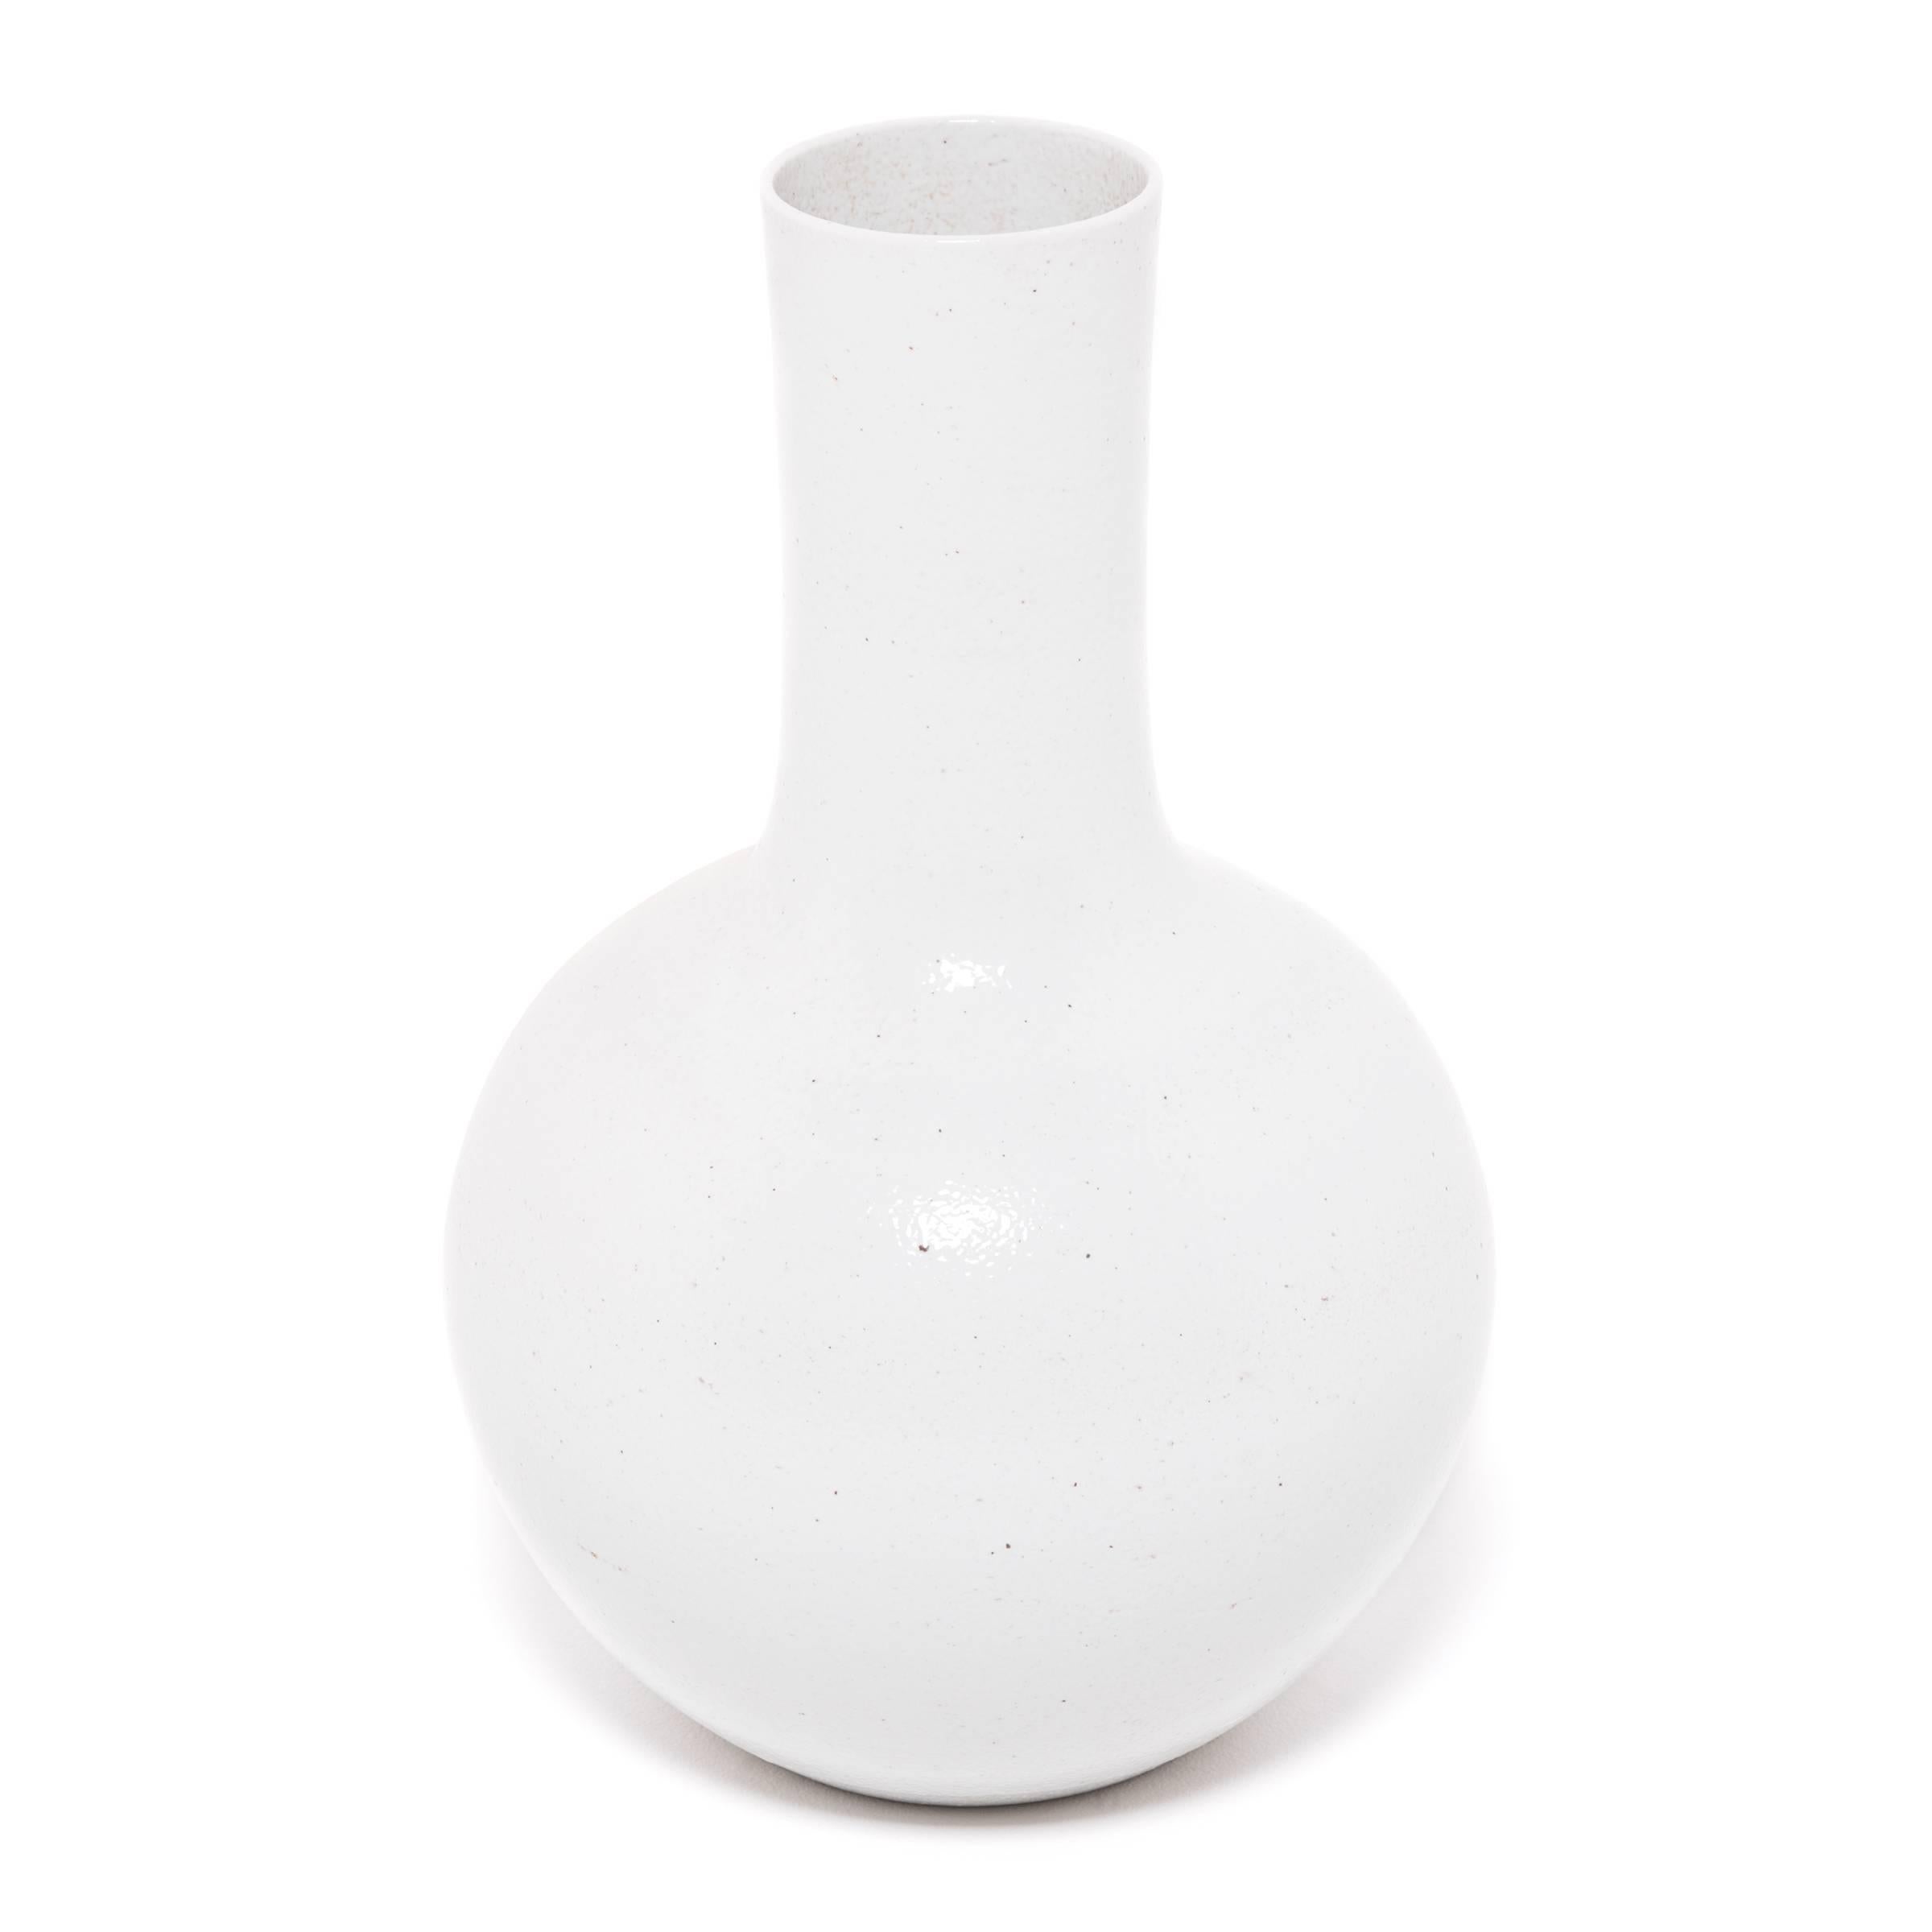 Drawing on a long Chinese tradition of ceramics, this striking long-necked vase is cloaked in an all-over milky white glaze. Sculpted by artisans in China's Zhejiang province, the large vase reinterprets a traditional shape known as a 